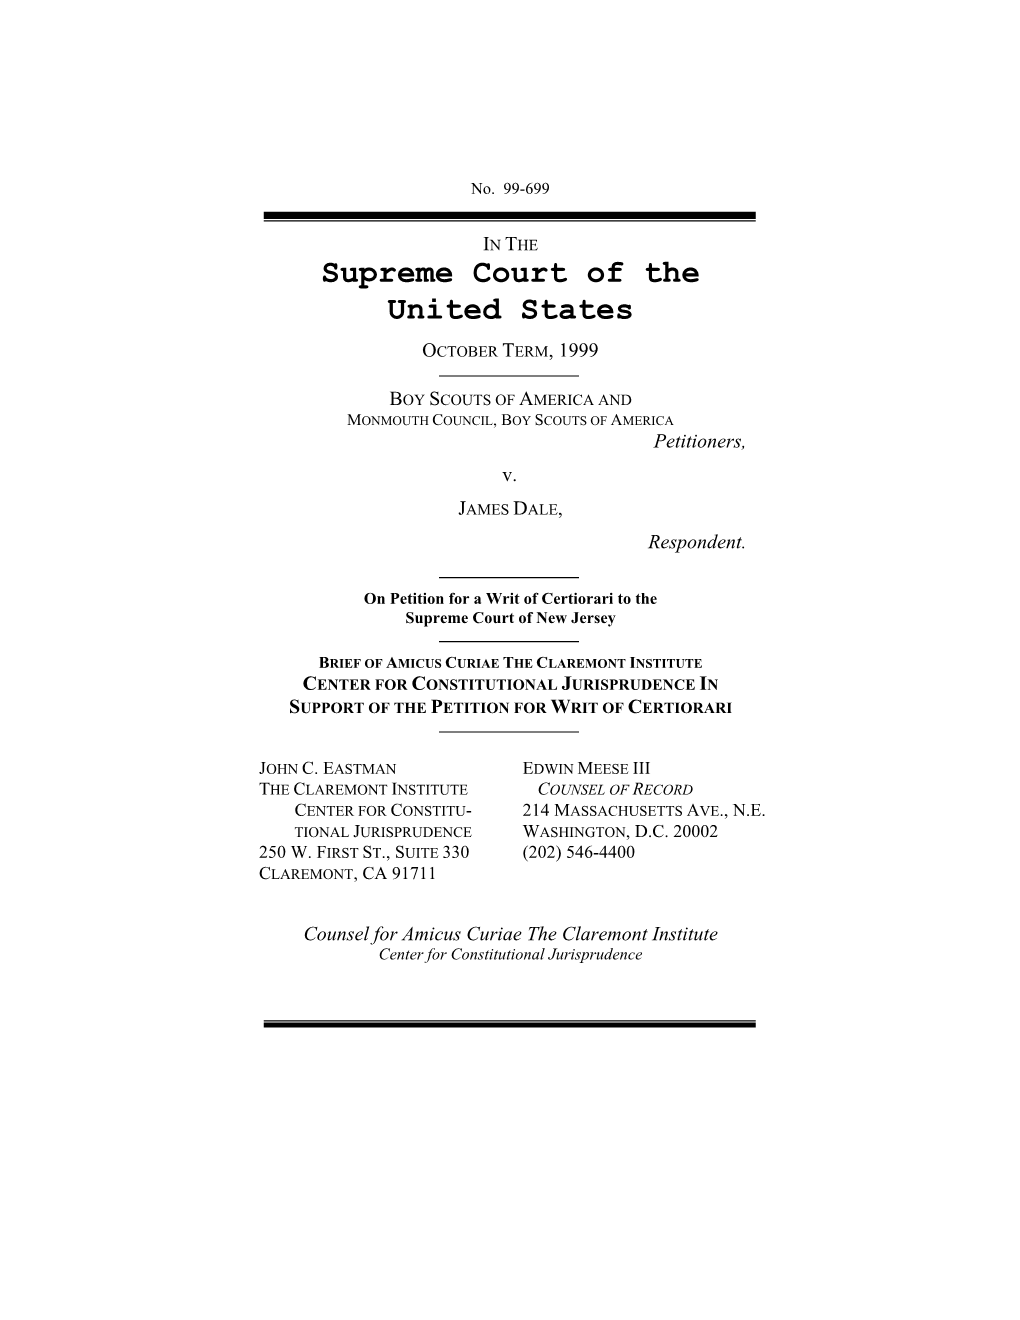 Supreme Court of the United States OCTOBER TERM, 1999